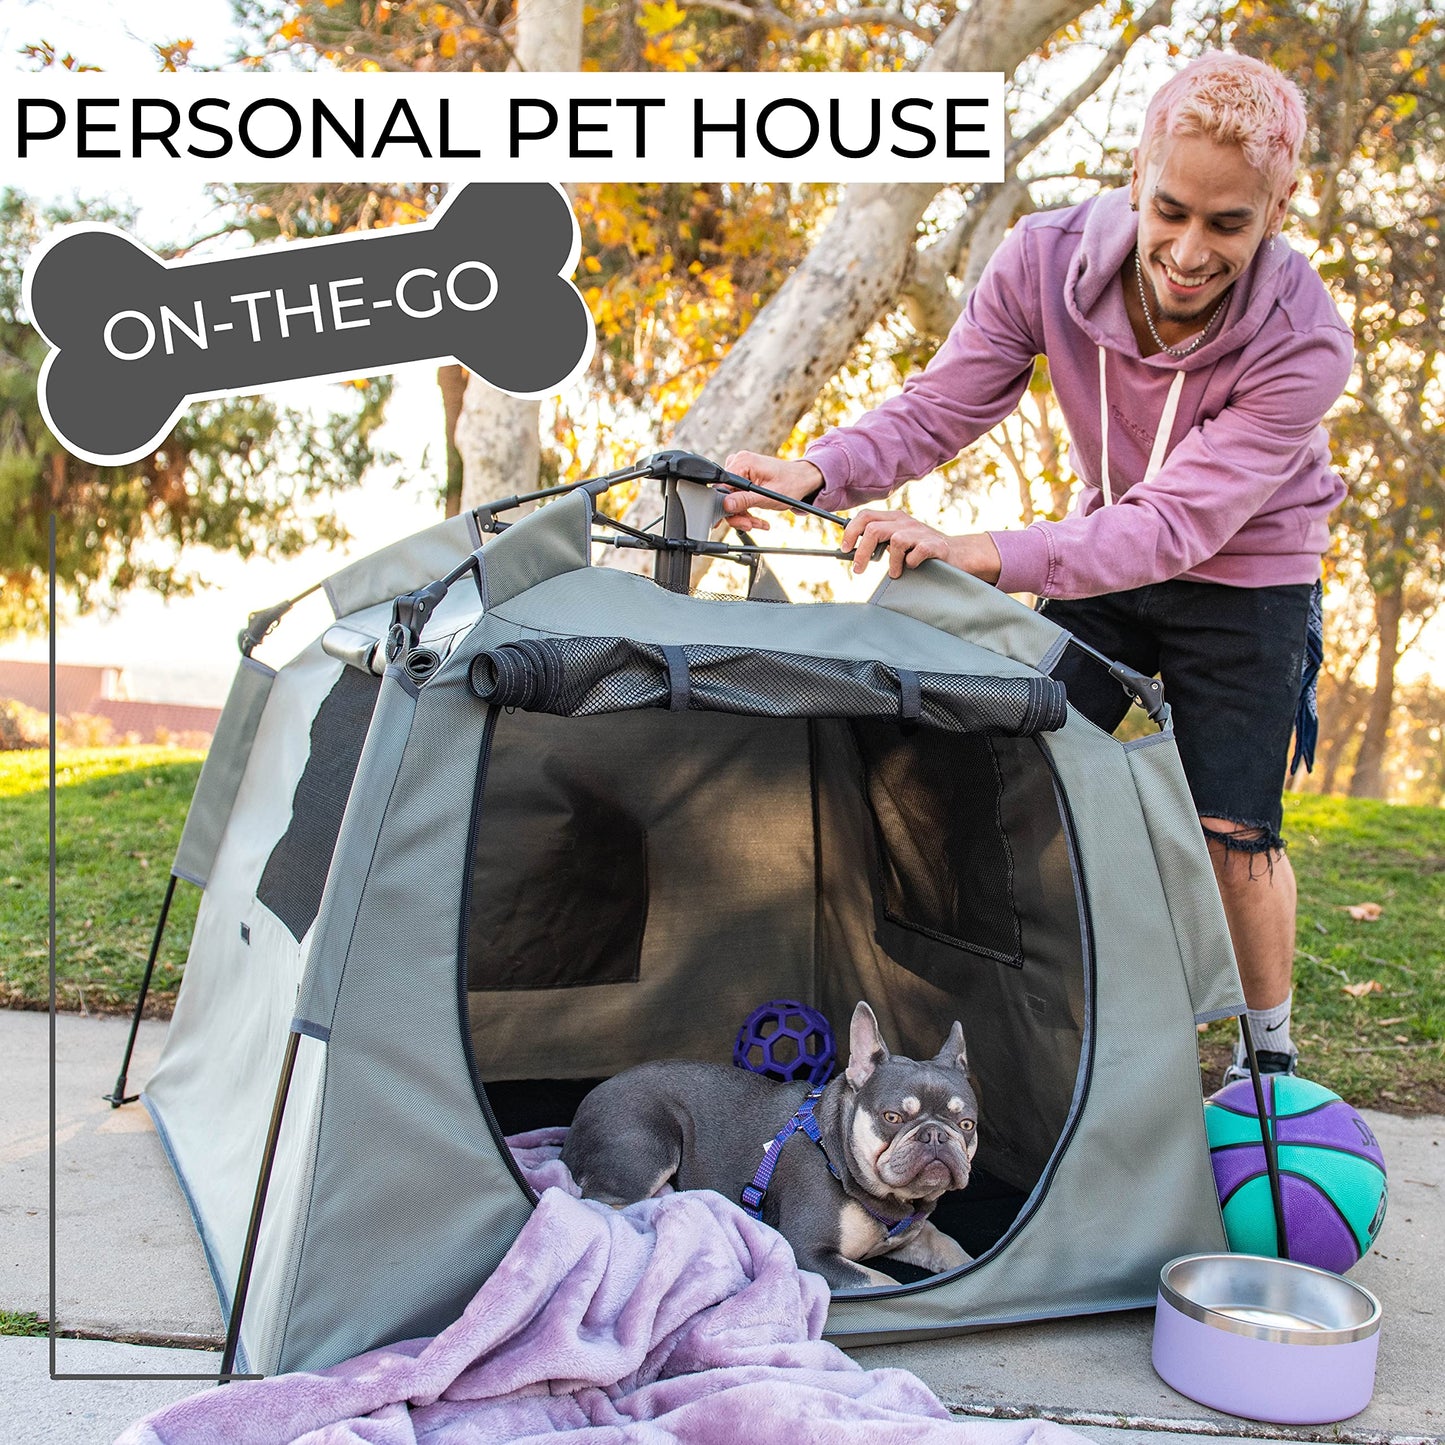 POP 'N GO Pet Playpen for Dogs and Cats - 39 x 33 Inch Dog Tent w/Carrying Bag - Outdoor Cat Enclosures Pets - Dog Travel Accessories for Camping - Grey